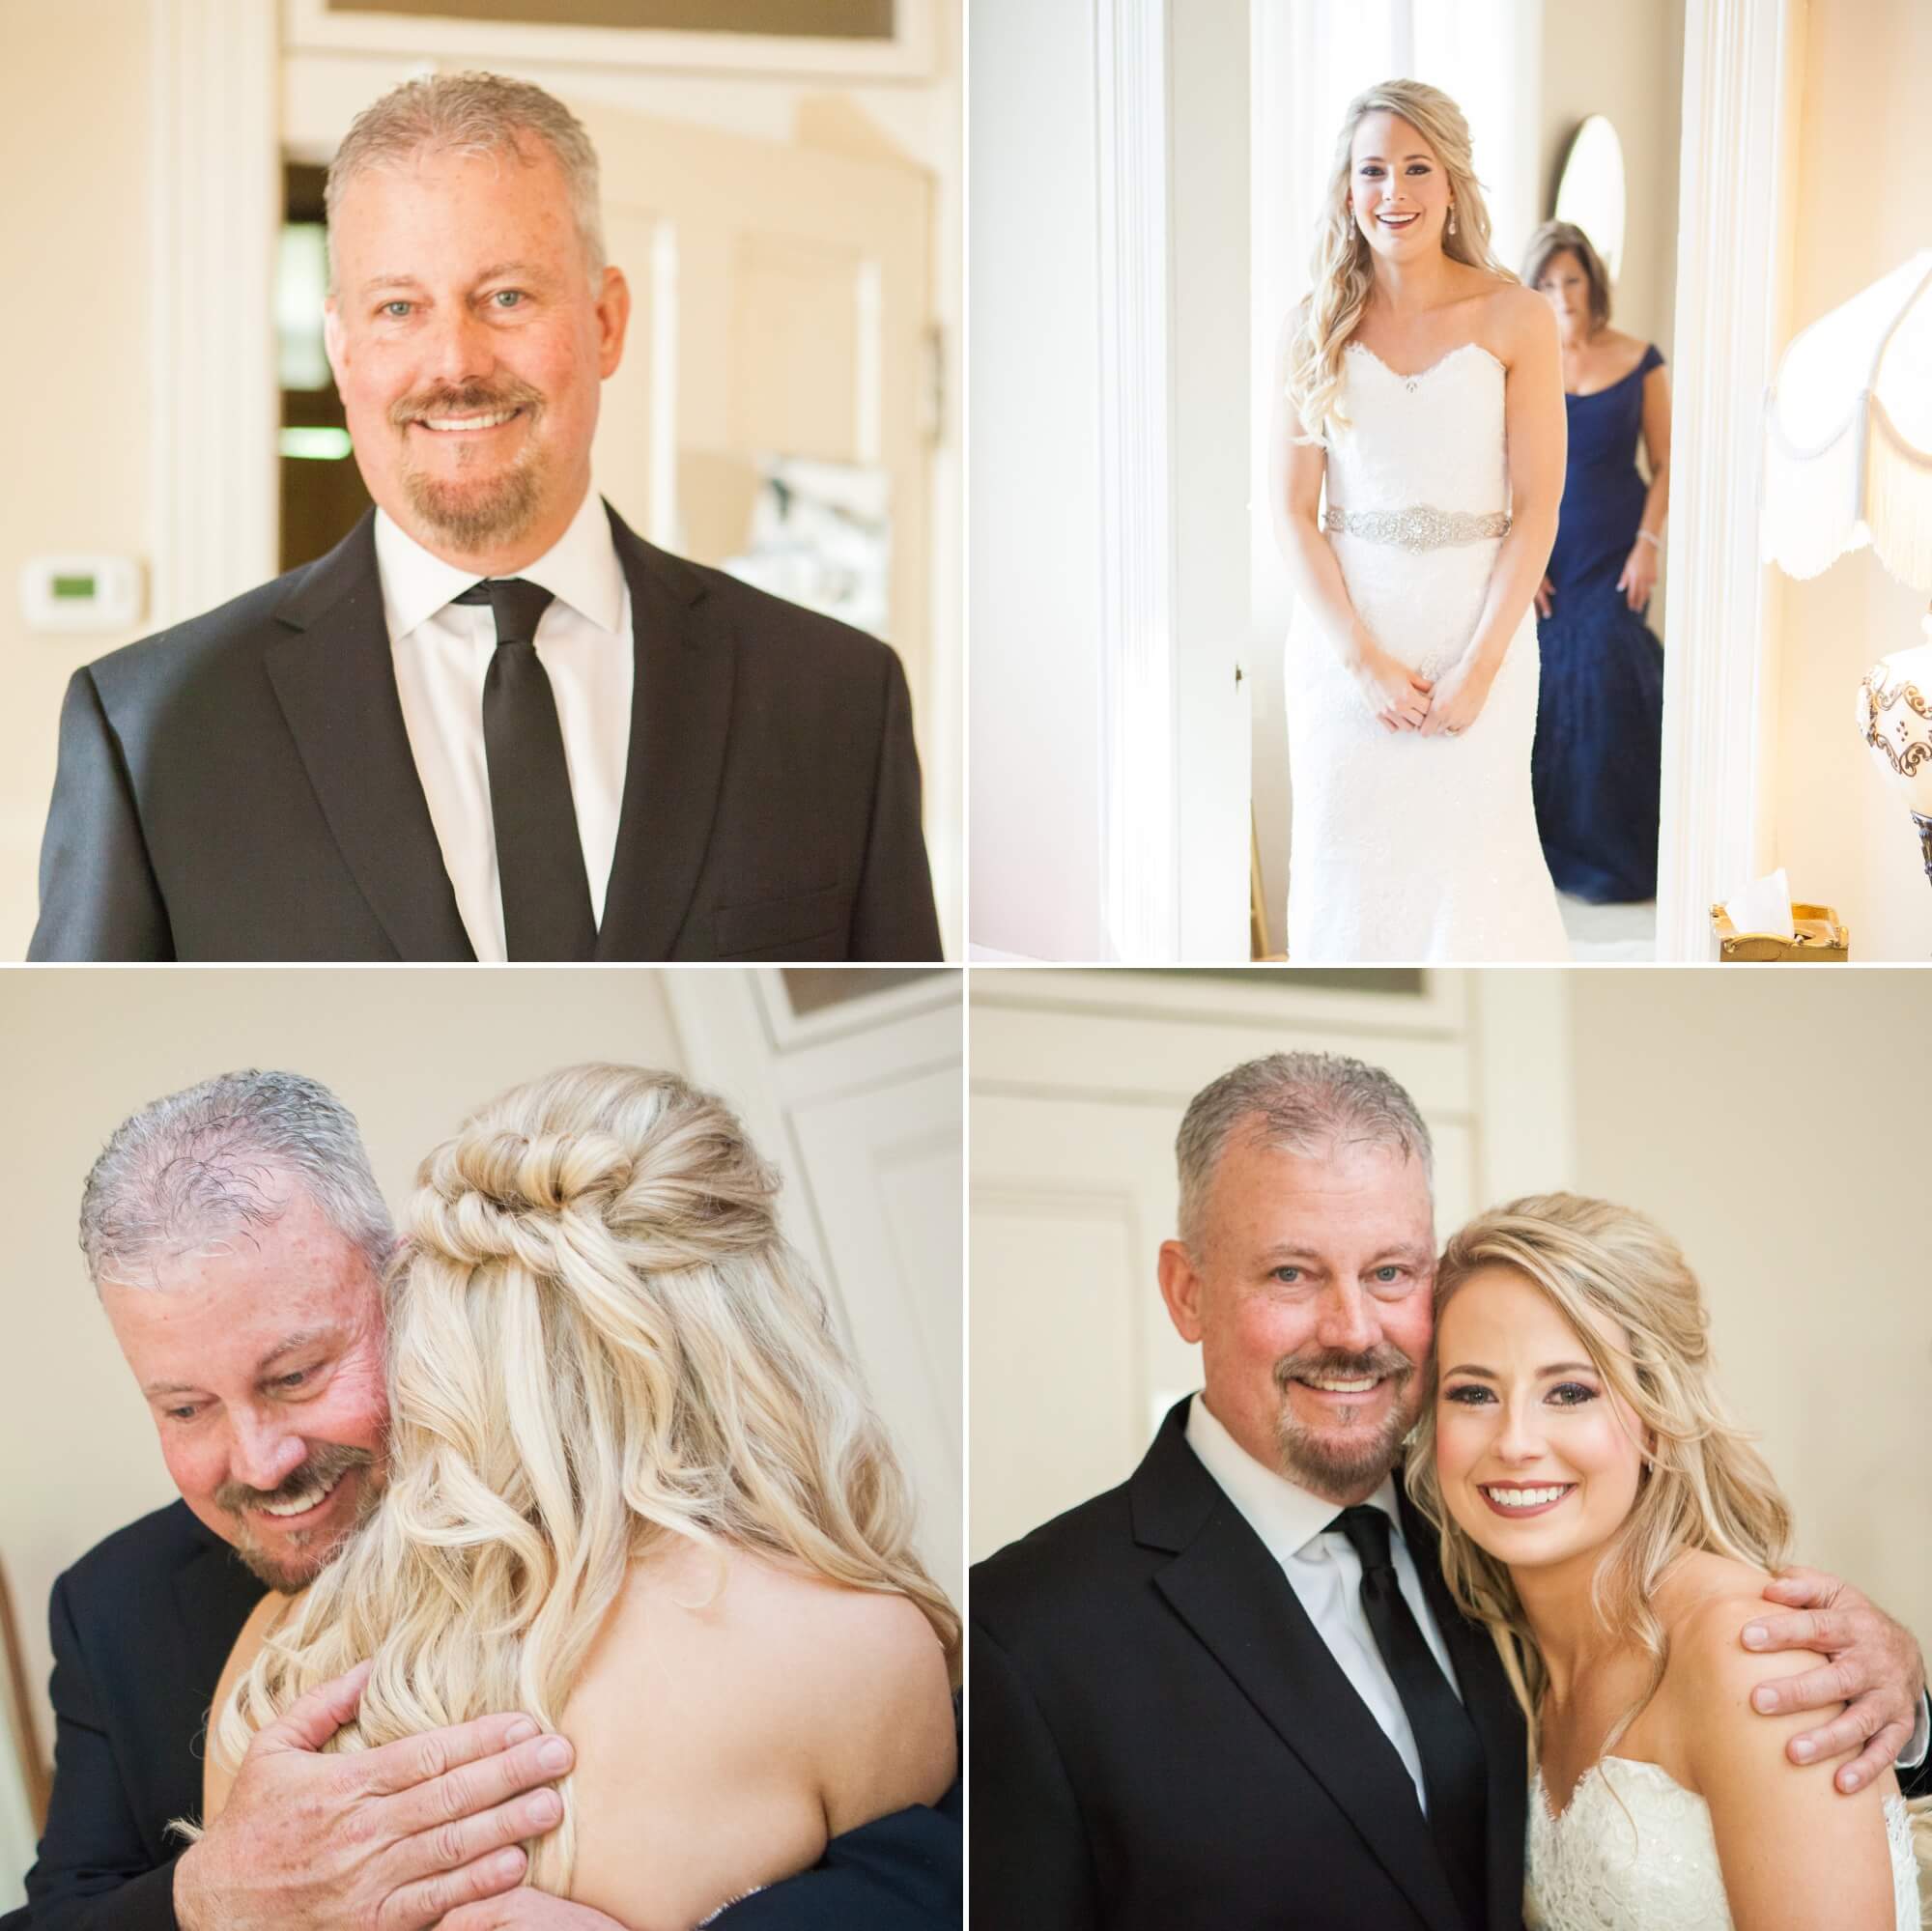 Bride does a first look with her dad before wedding ceremony at Riverwood Mansion in Nashville, Tennessee. Photography by Krista Lee.